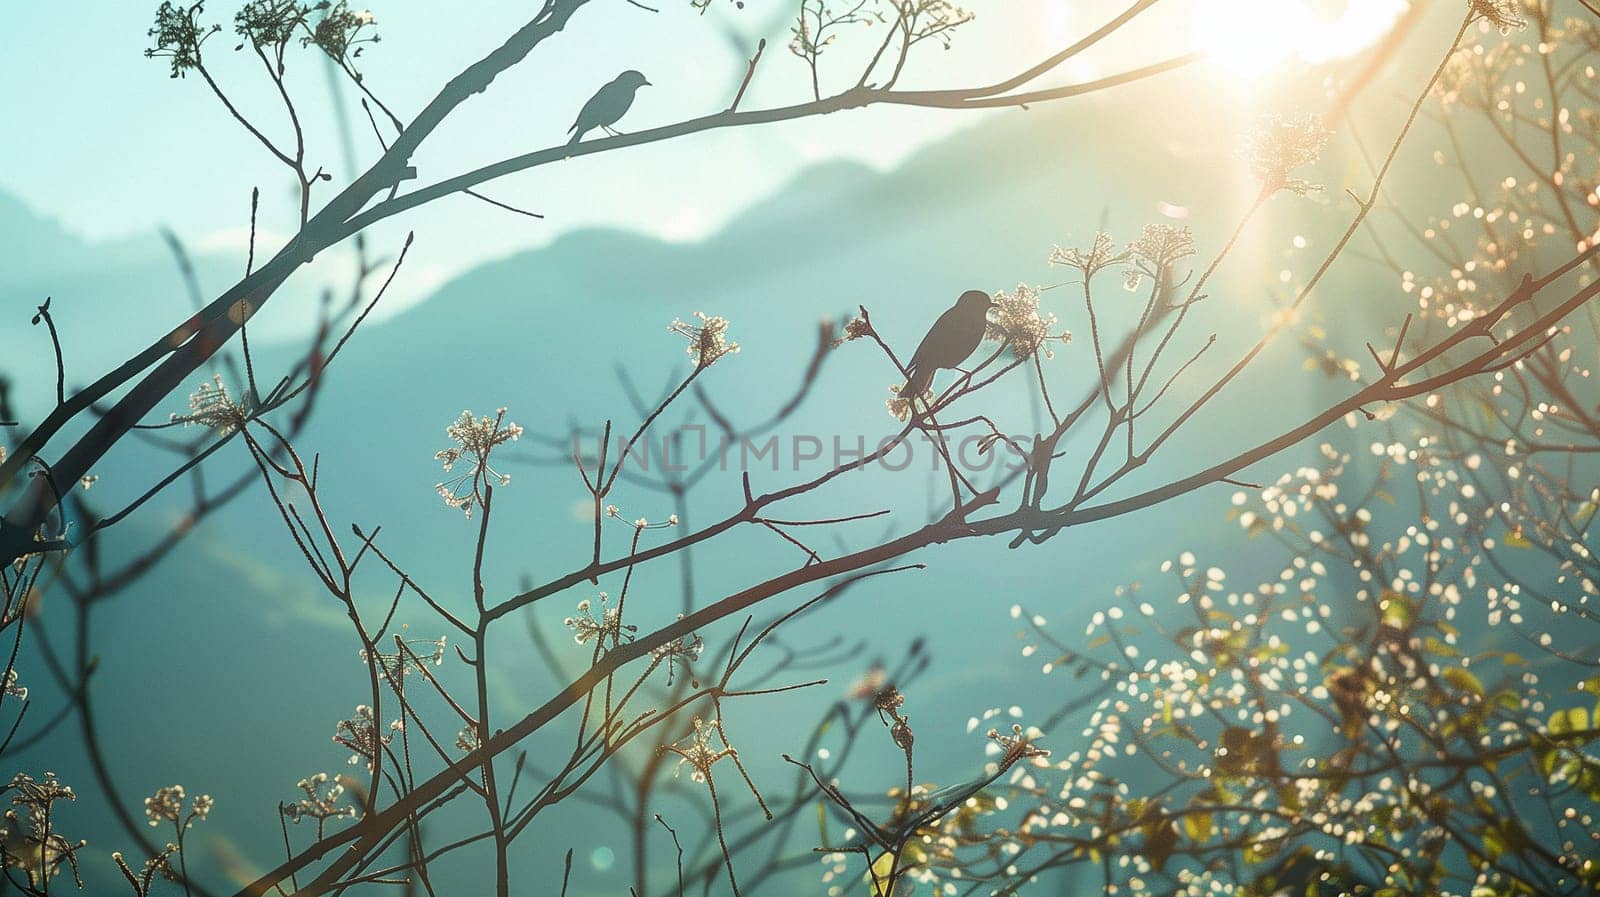 Birds are sitting on the branches of trees. Mountain landscape. High quality photo